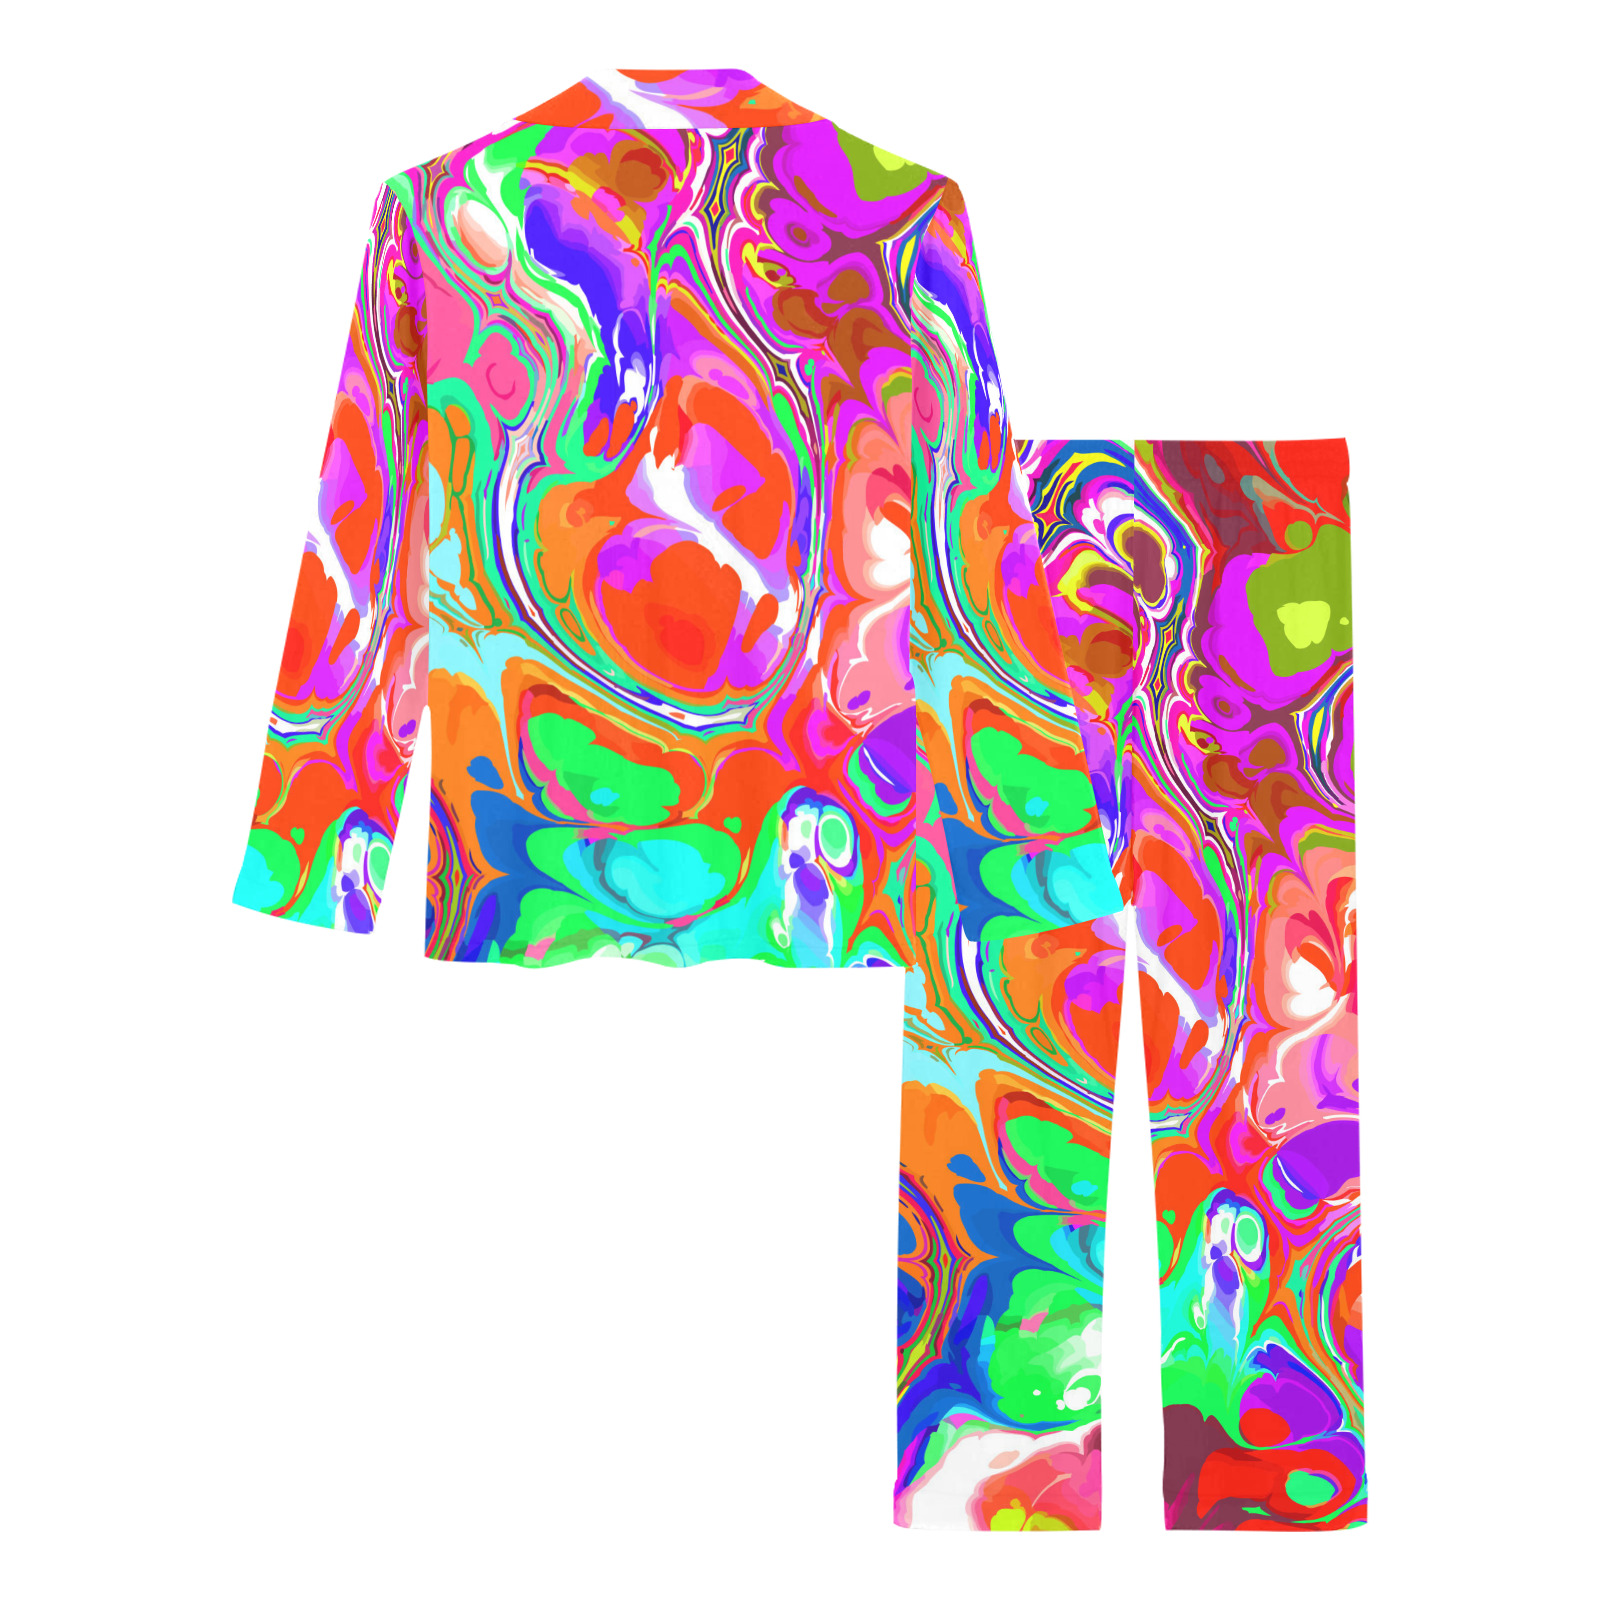 Psychedelic Abstract Marble Artistic Dynamic Paint Art Women's Long Pajama Set